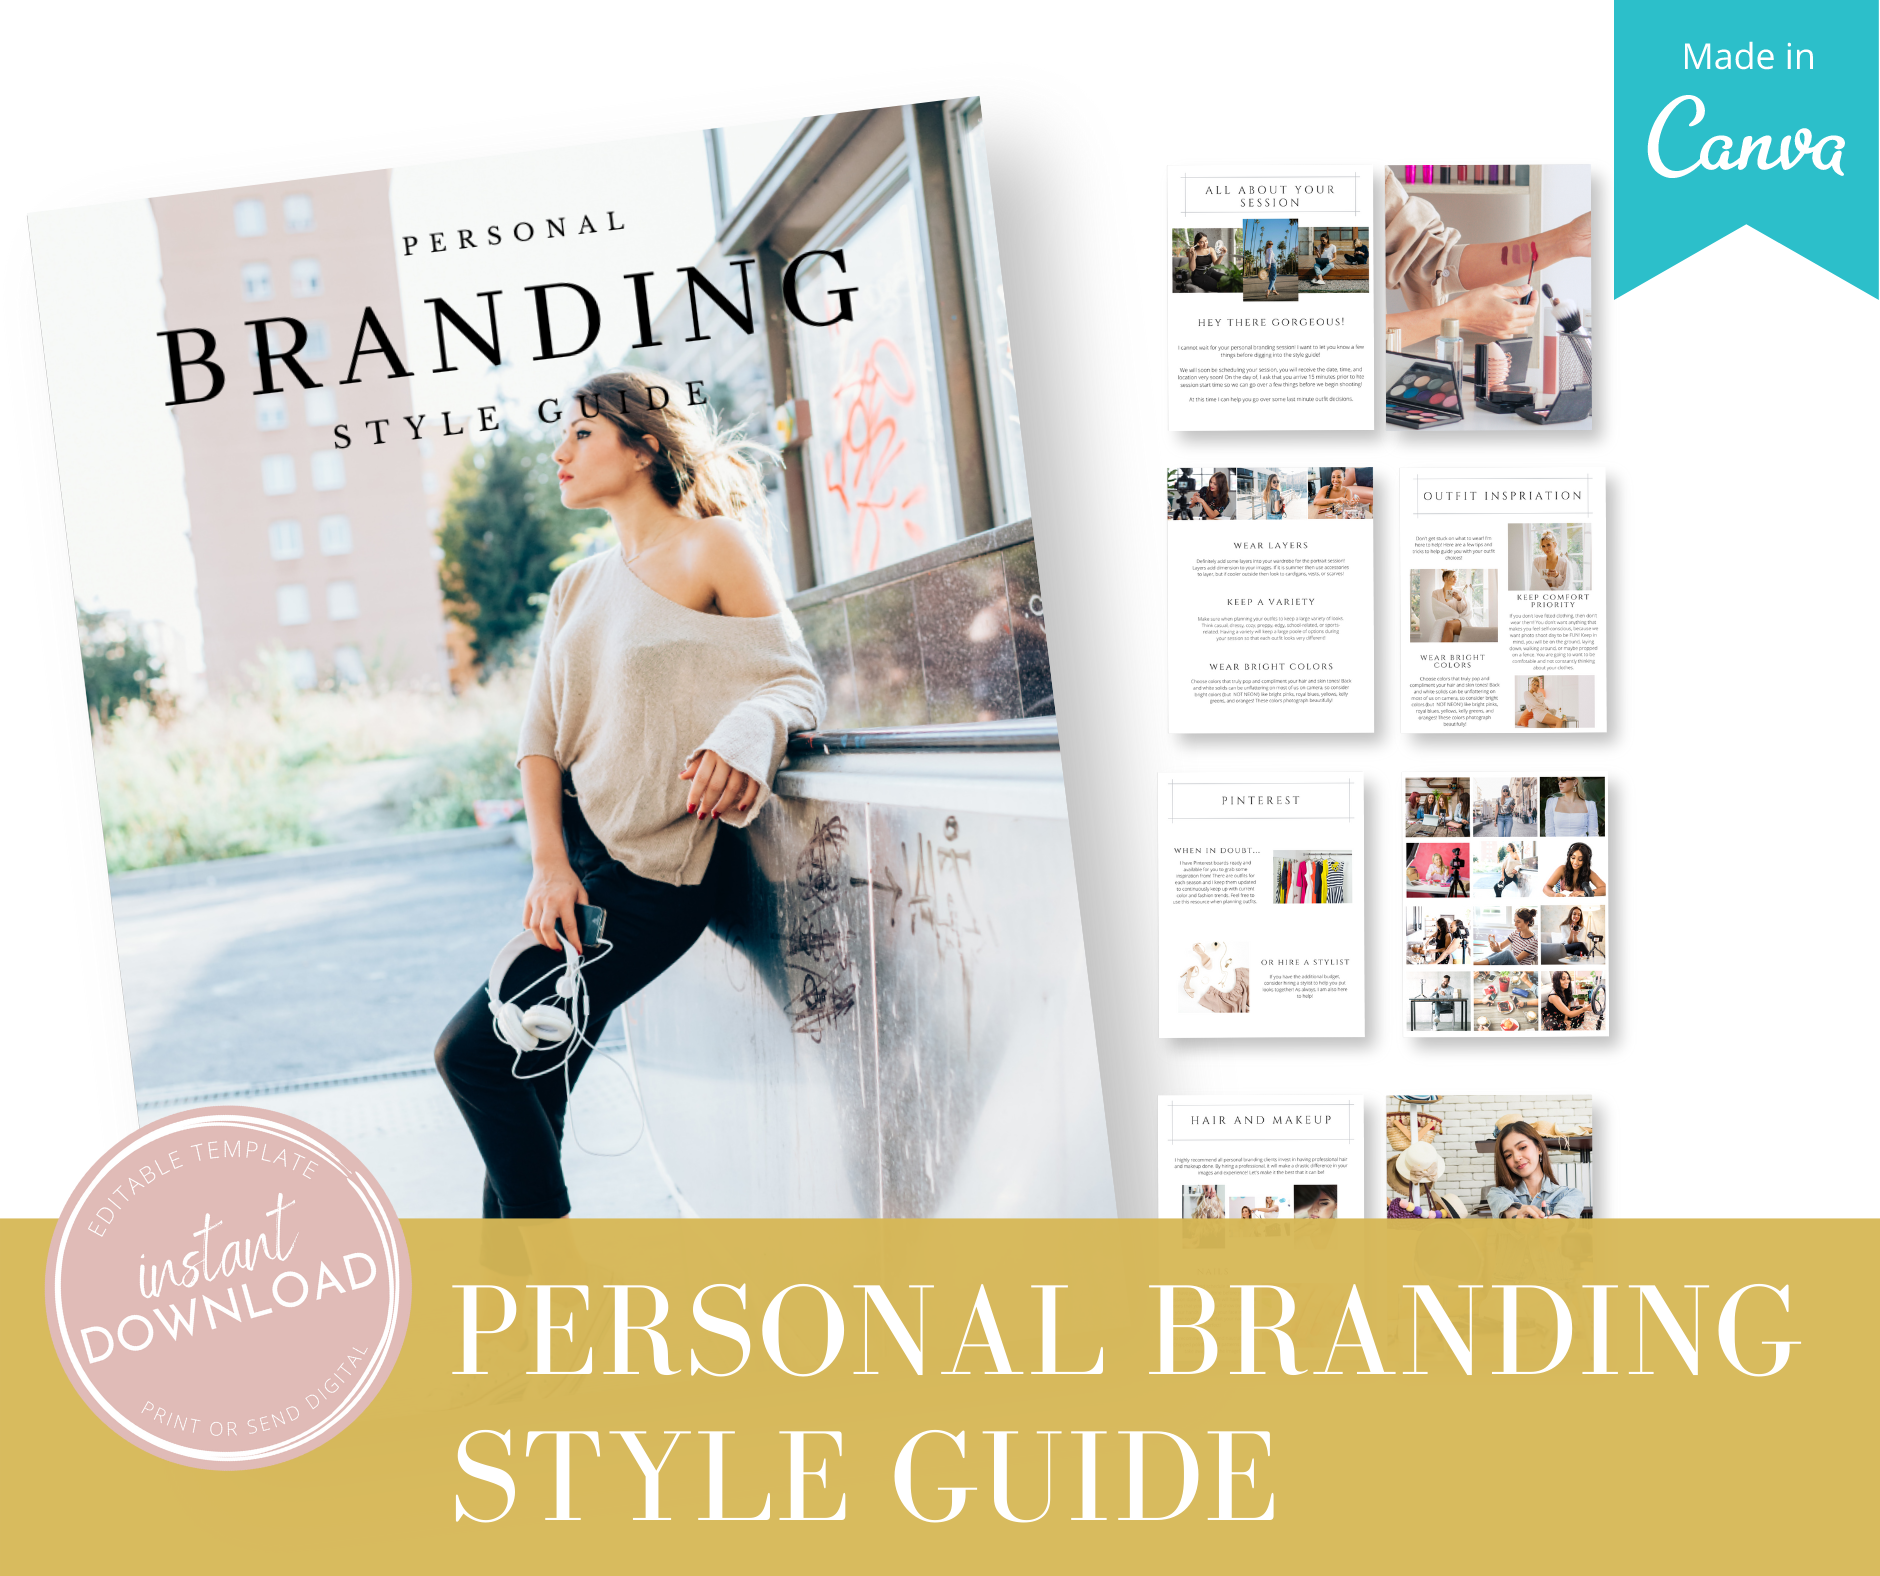 Mockup of branding style guide by Mint Magnolia Photography. Image of a lady holding her phone and headphones, leaning against a wall.